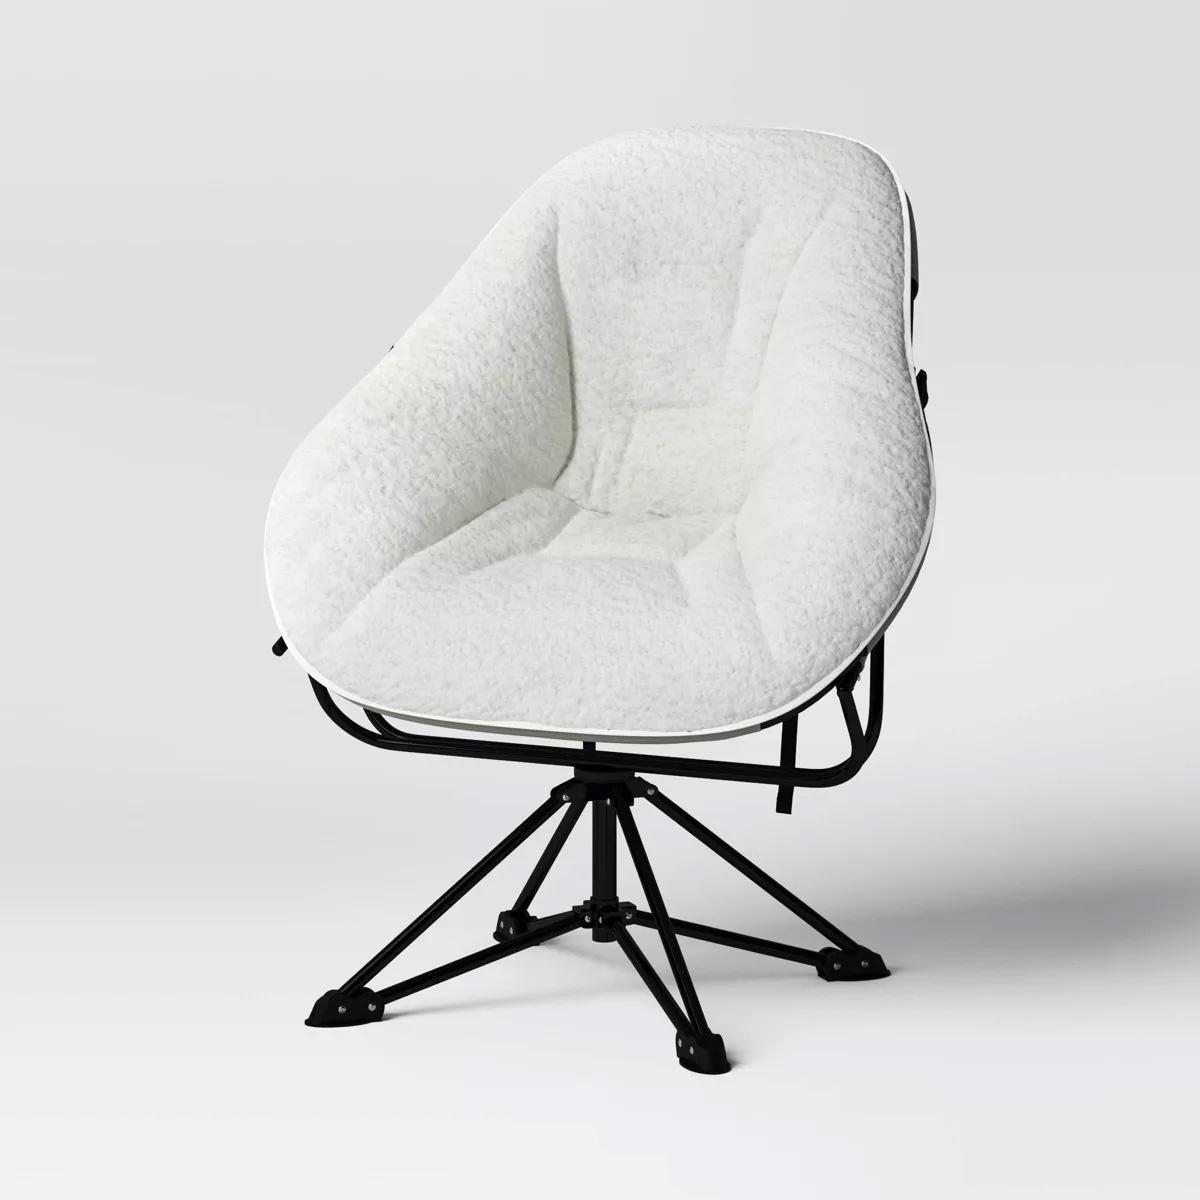 Room Essentials Padded Hex Swivel Chair for $49 Shipped